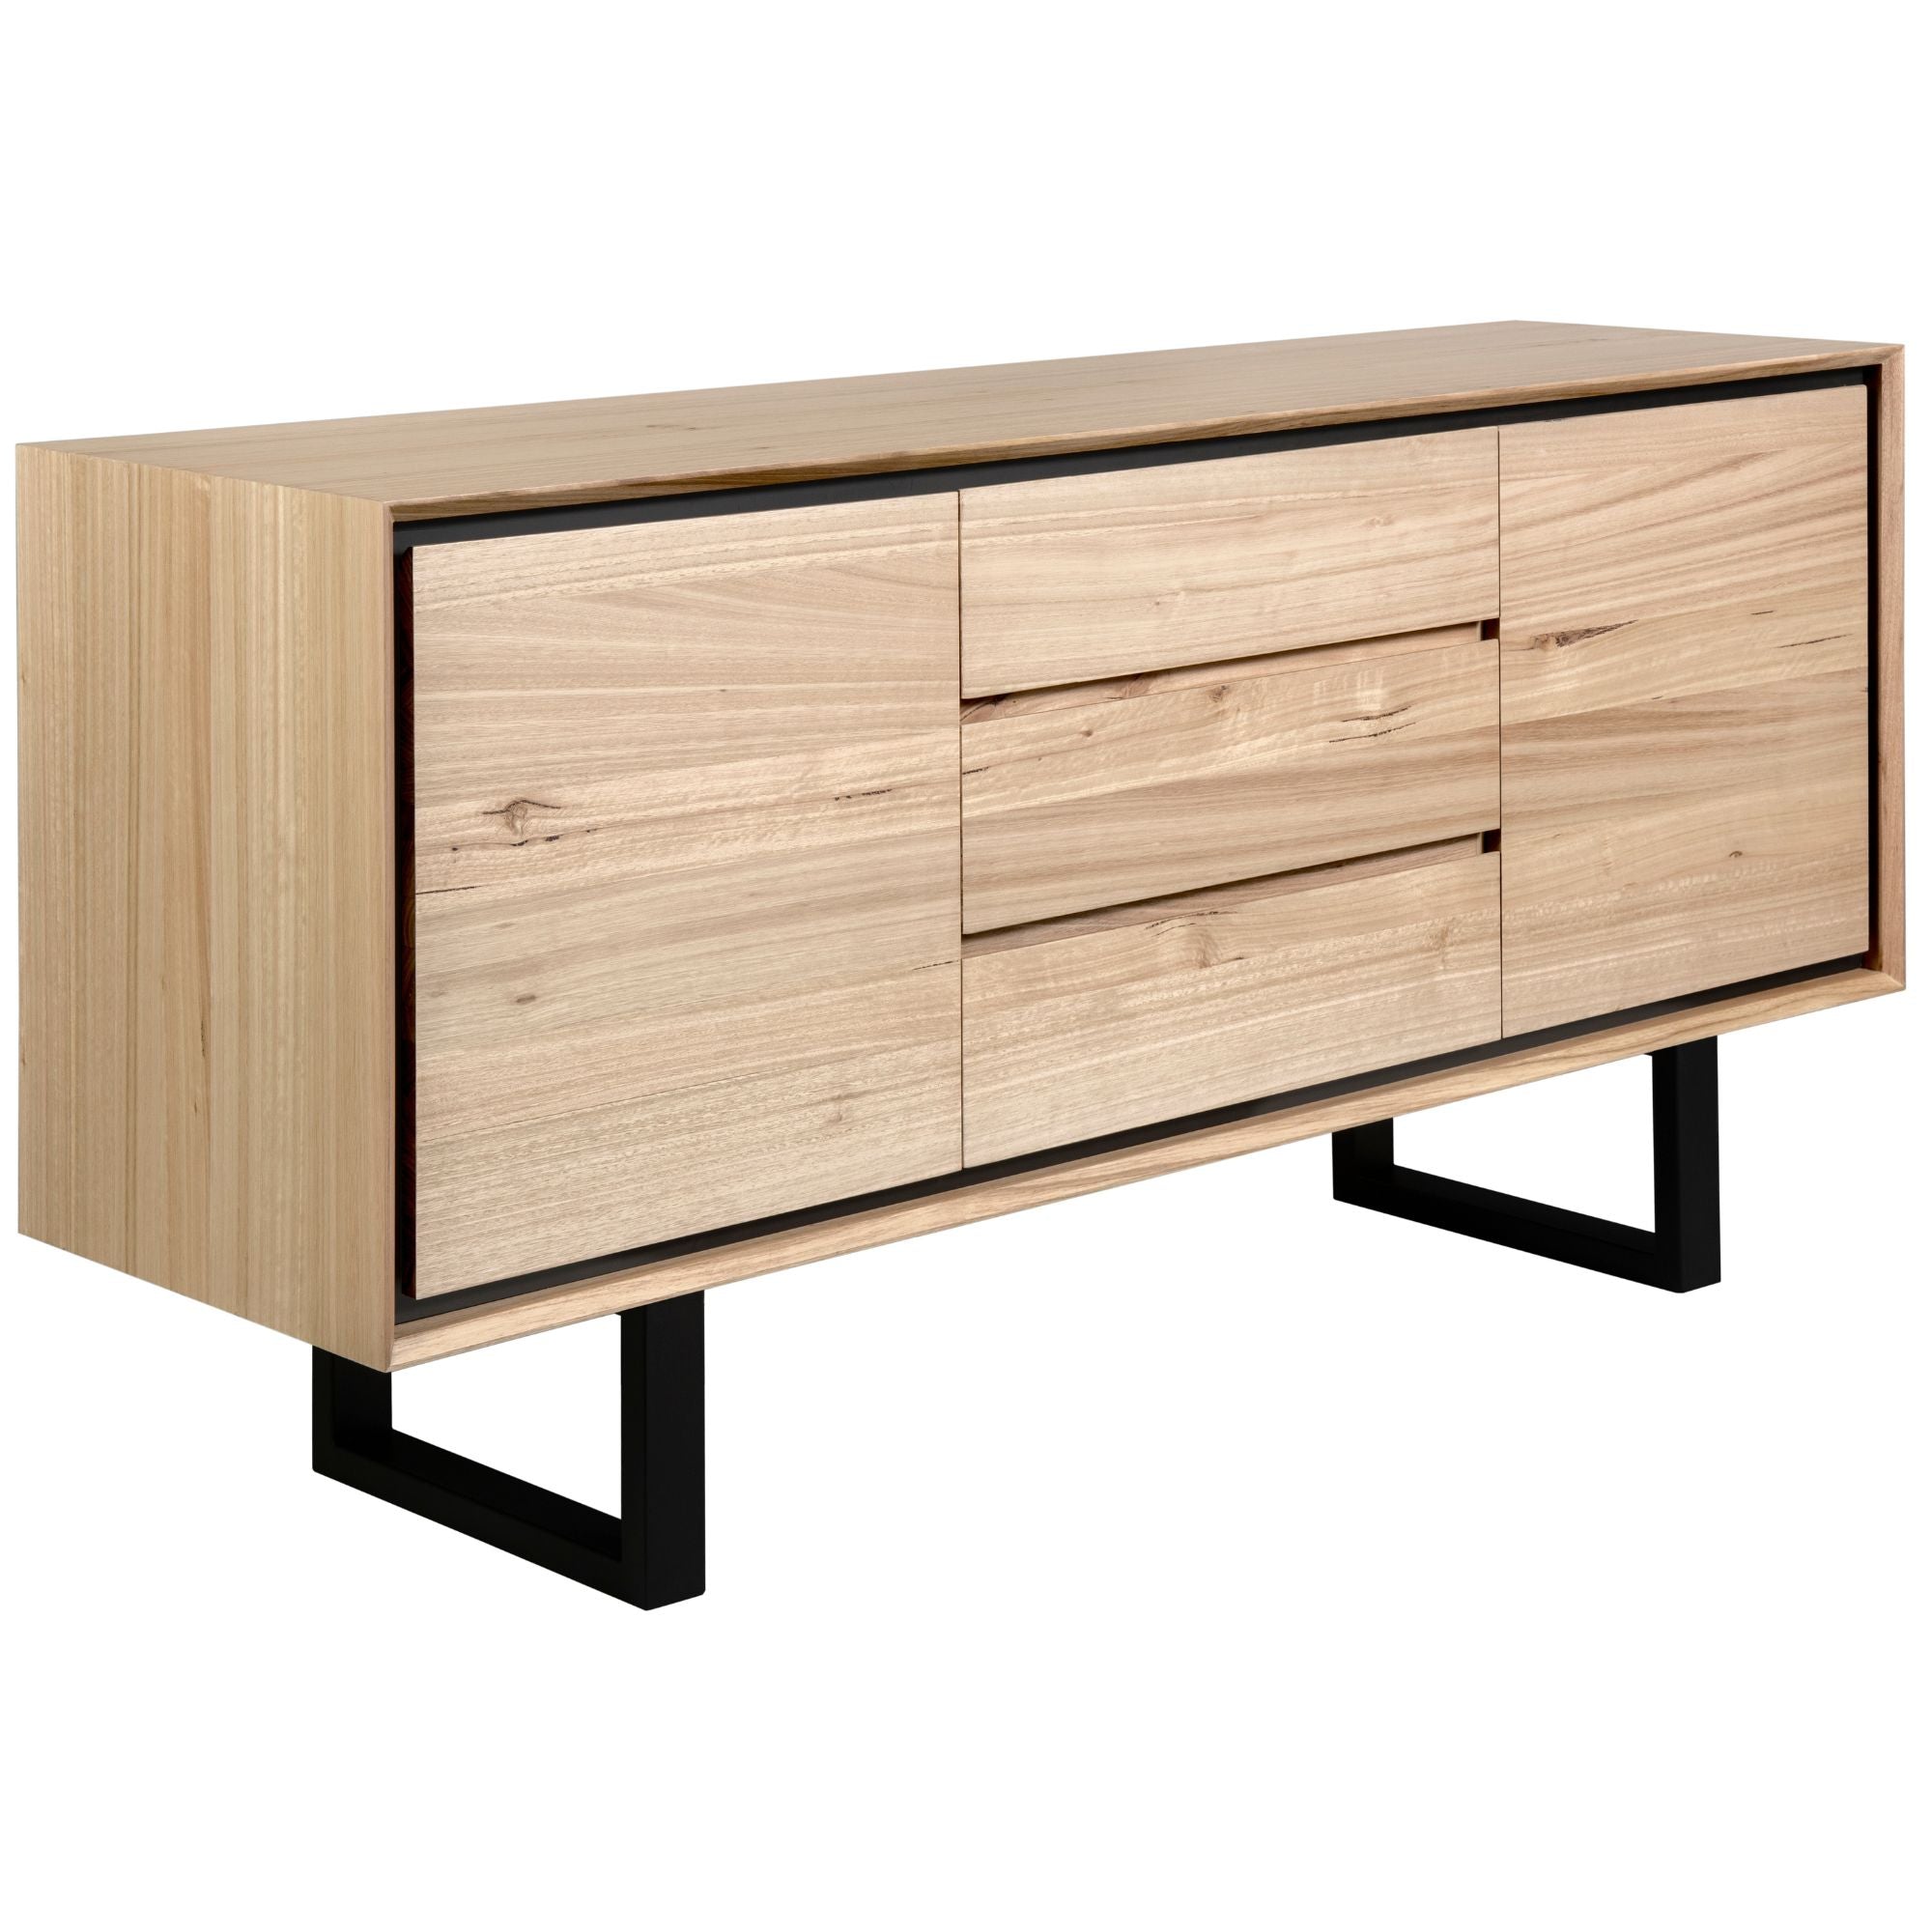 Buffet Table 180Cm 2 Door 3 Drawer Solid Messmate Timber Wood - Natural